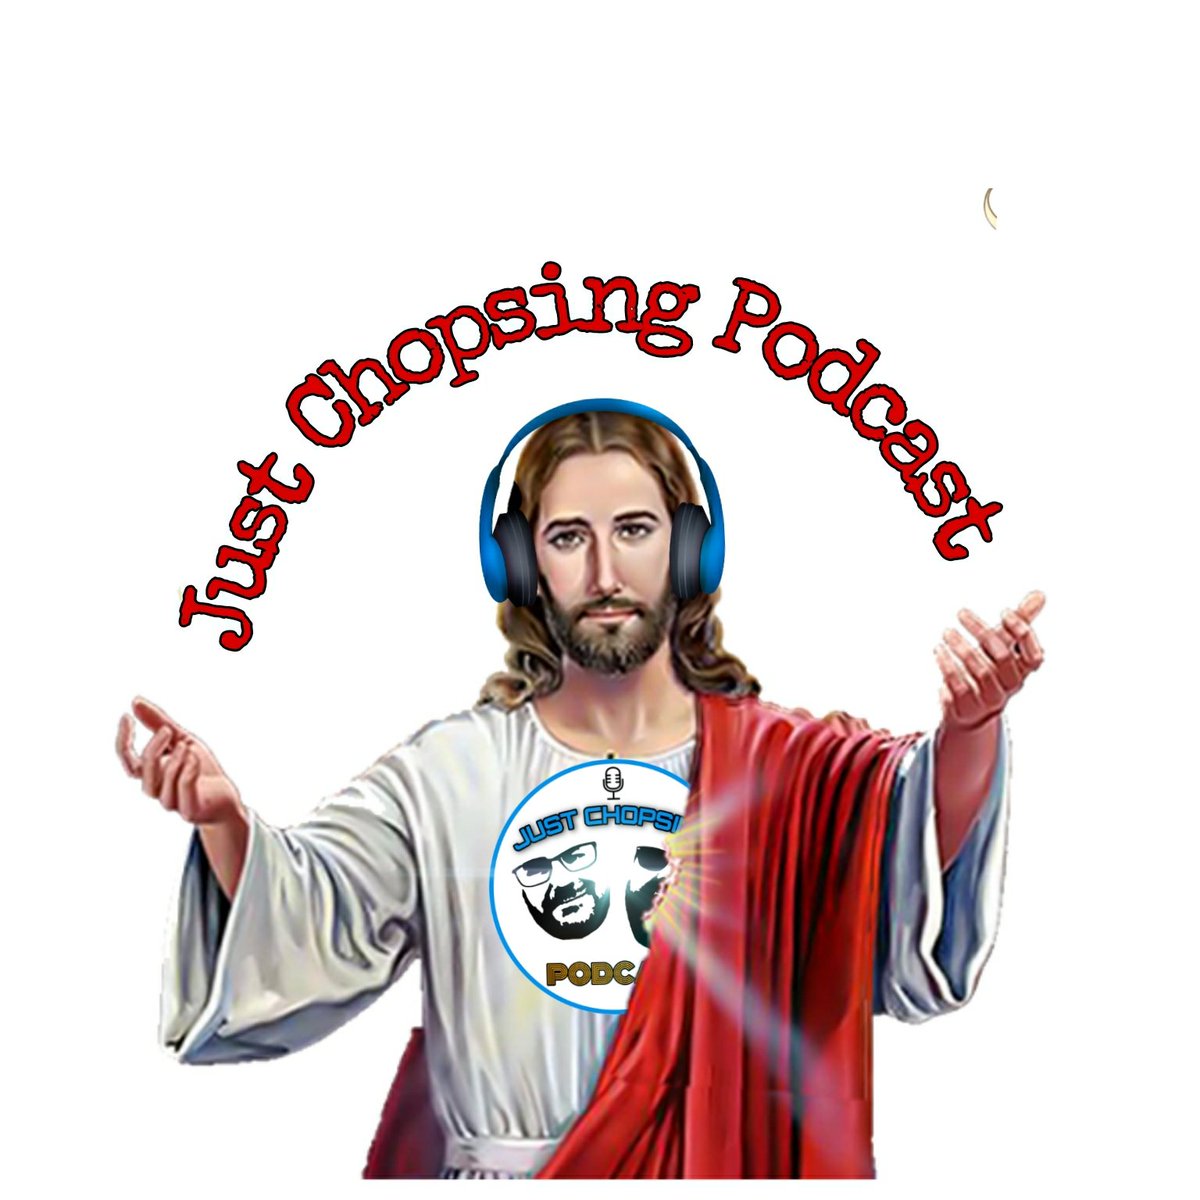 All you #christians out there, don't forget to check out just chopsing podcast.